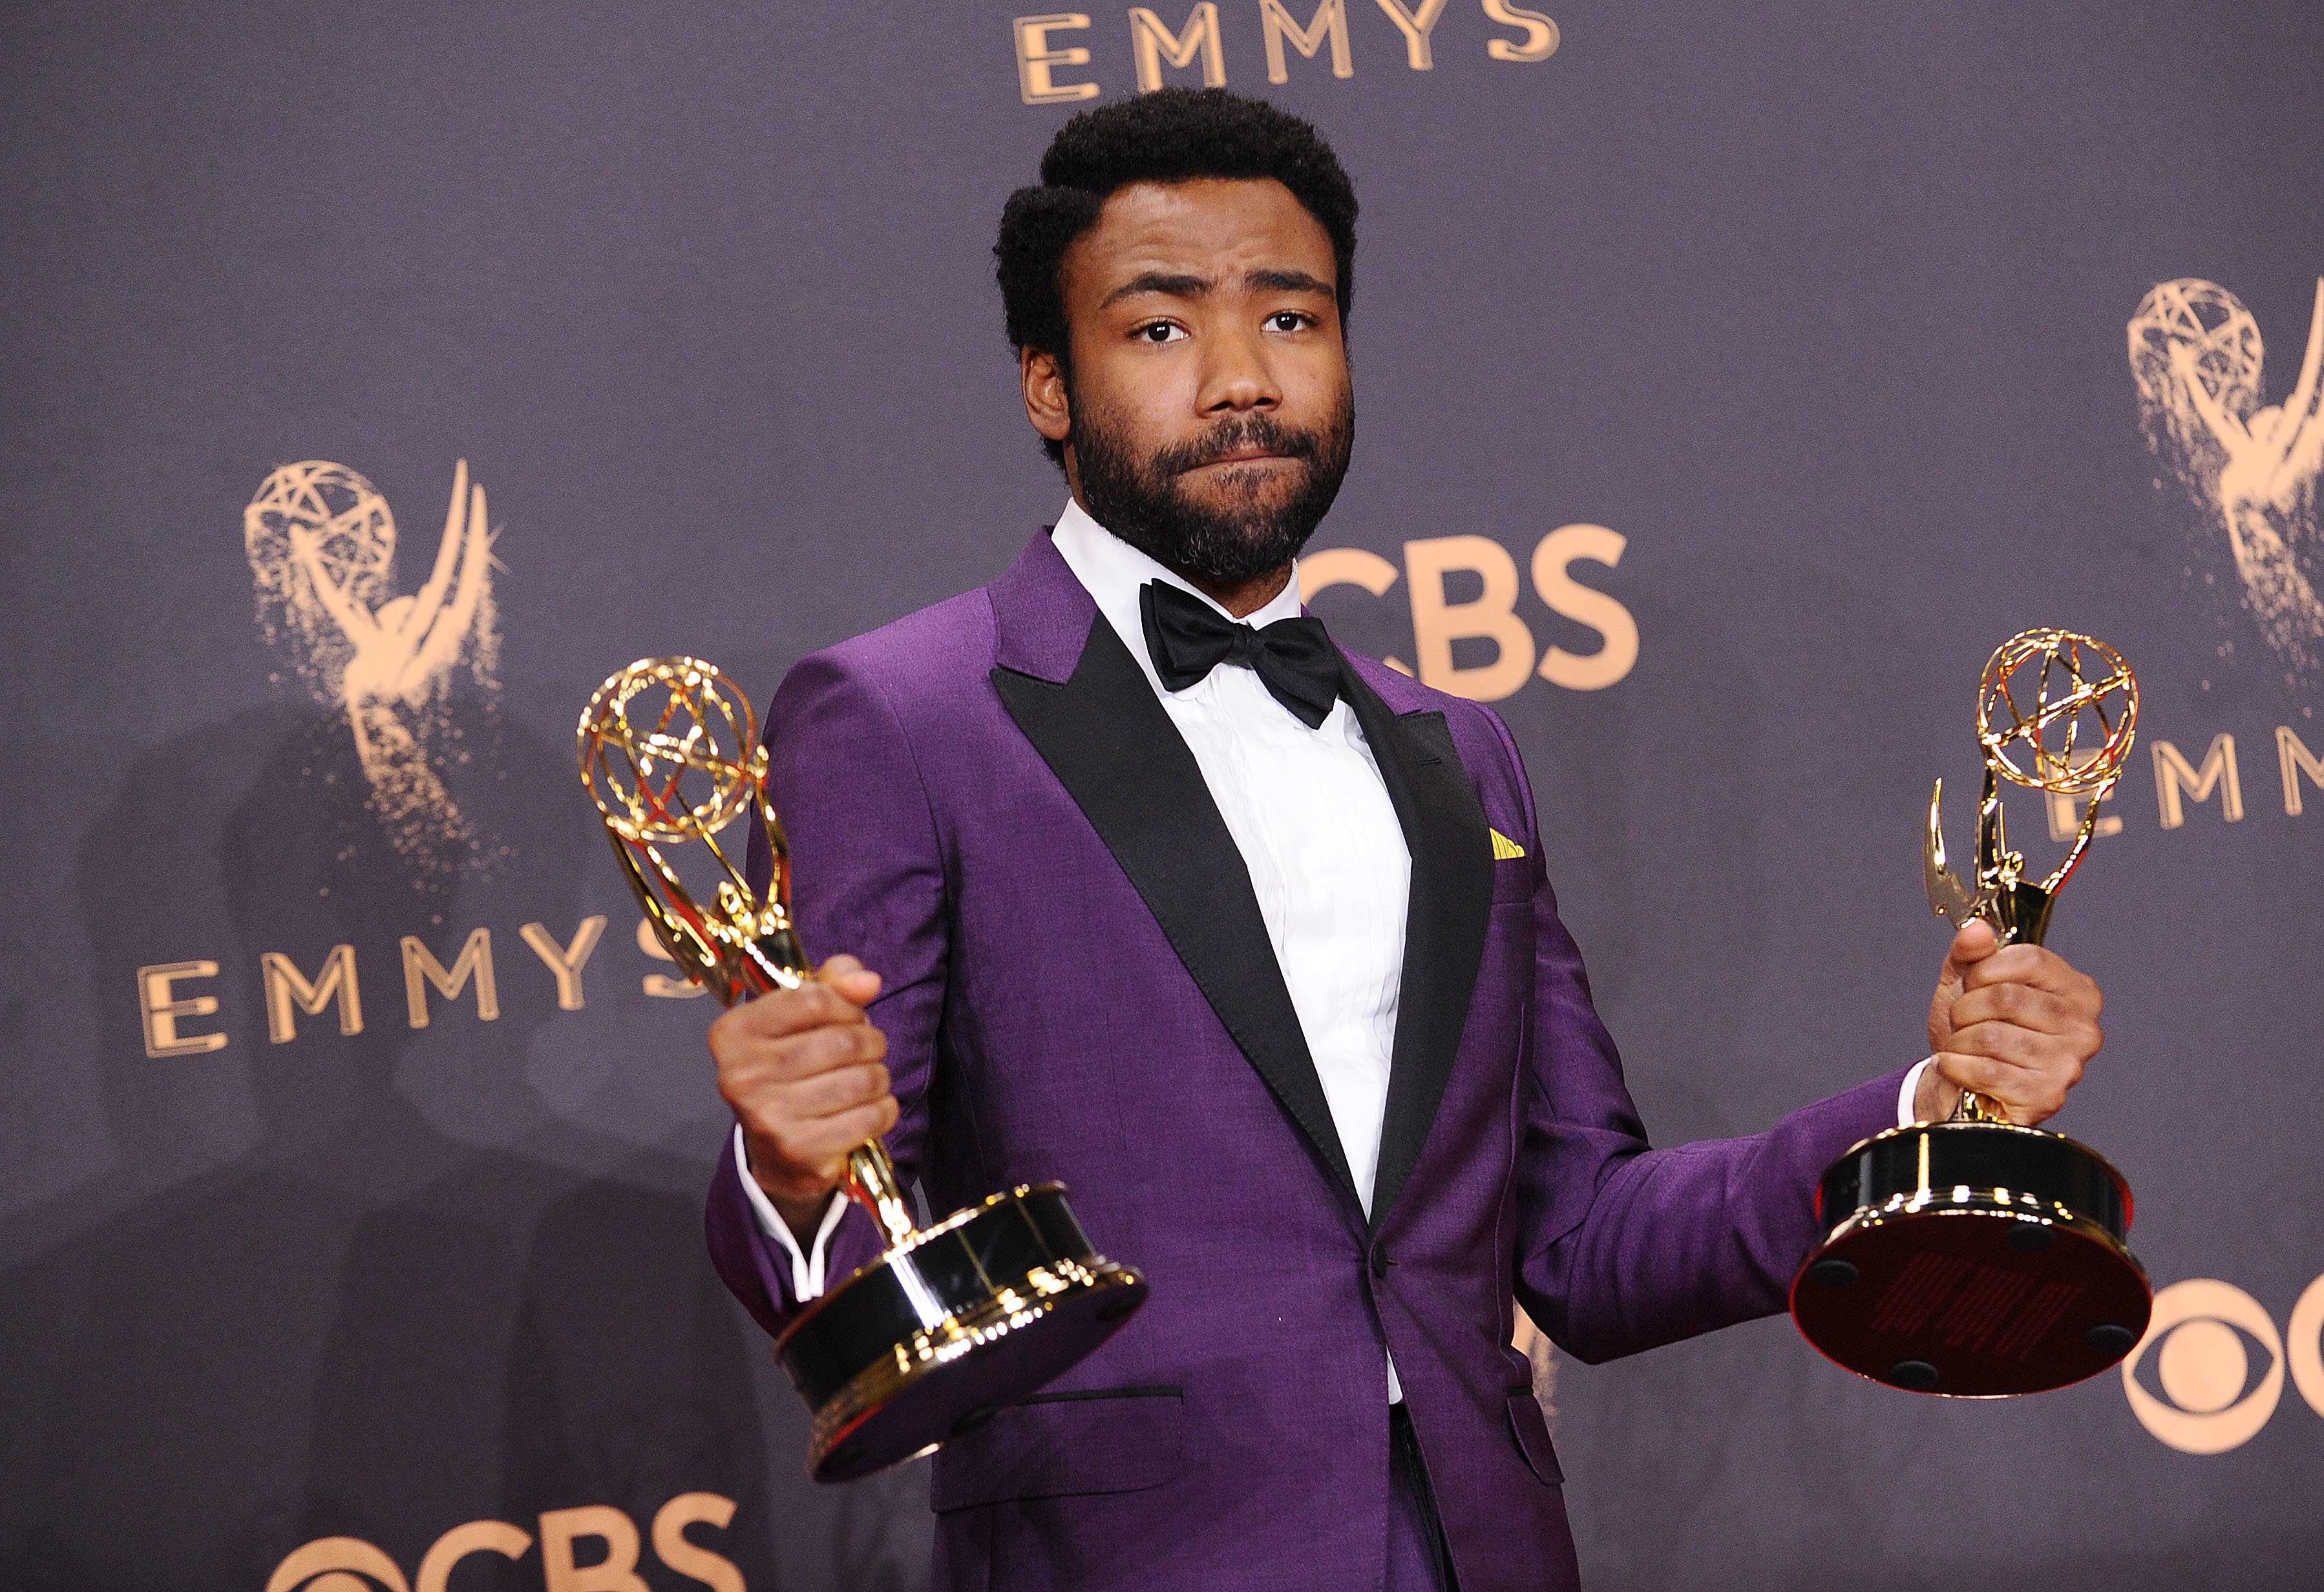 <p>Donald Glover made history during the <a href="https://www.wonderwall.com/awards-events/emmys/2017-emmy-awards-red-carpet-3009953.gallery">2017 Emmys</a> when he became the first Black person to win the award for outstanding directing for a comedy series for his work on "Atlanta." The same night, he also took home the Emmy for best lead actor on a comedy series for his performance on the FX dramedy.</p>